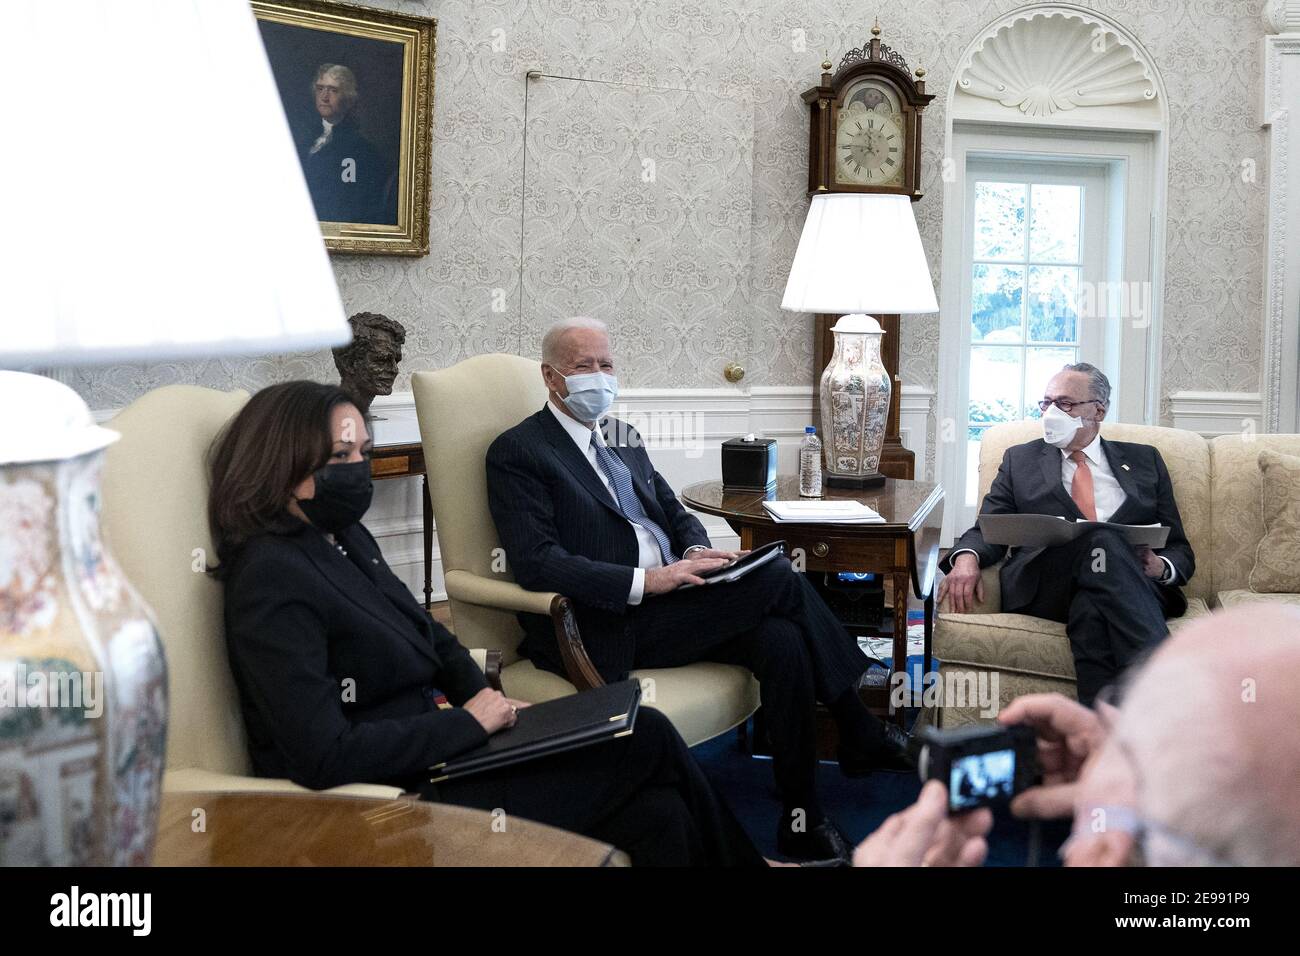 Senator Patrick Leahy (D-VT) takes a photo of President Joe Biden, center, during a meeting to discuss the American Rescue Plan in the Oval Office of the White House in Washington on Wednesday, February 3, 2021. (Stefani Reynolds/The New York Times) Stock Photo